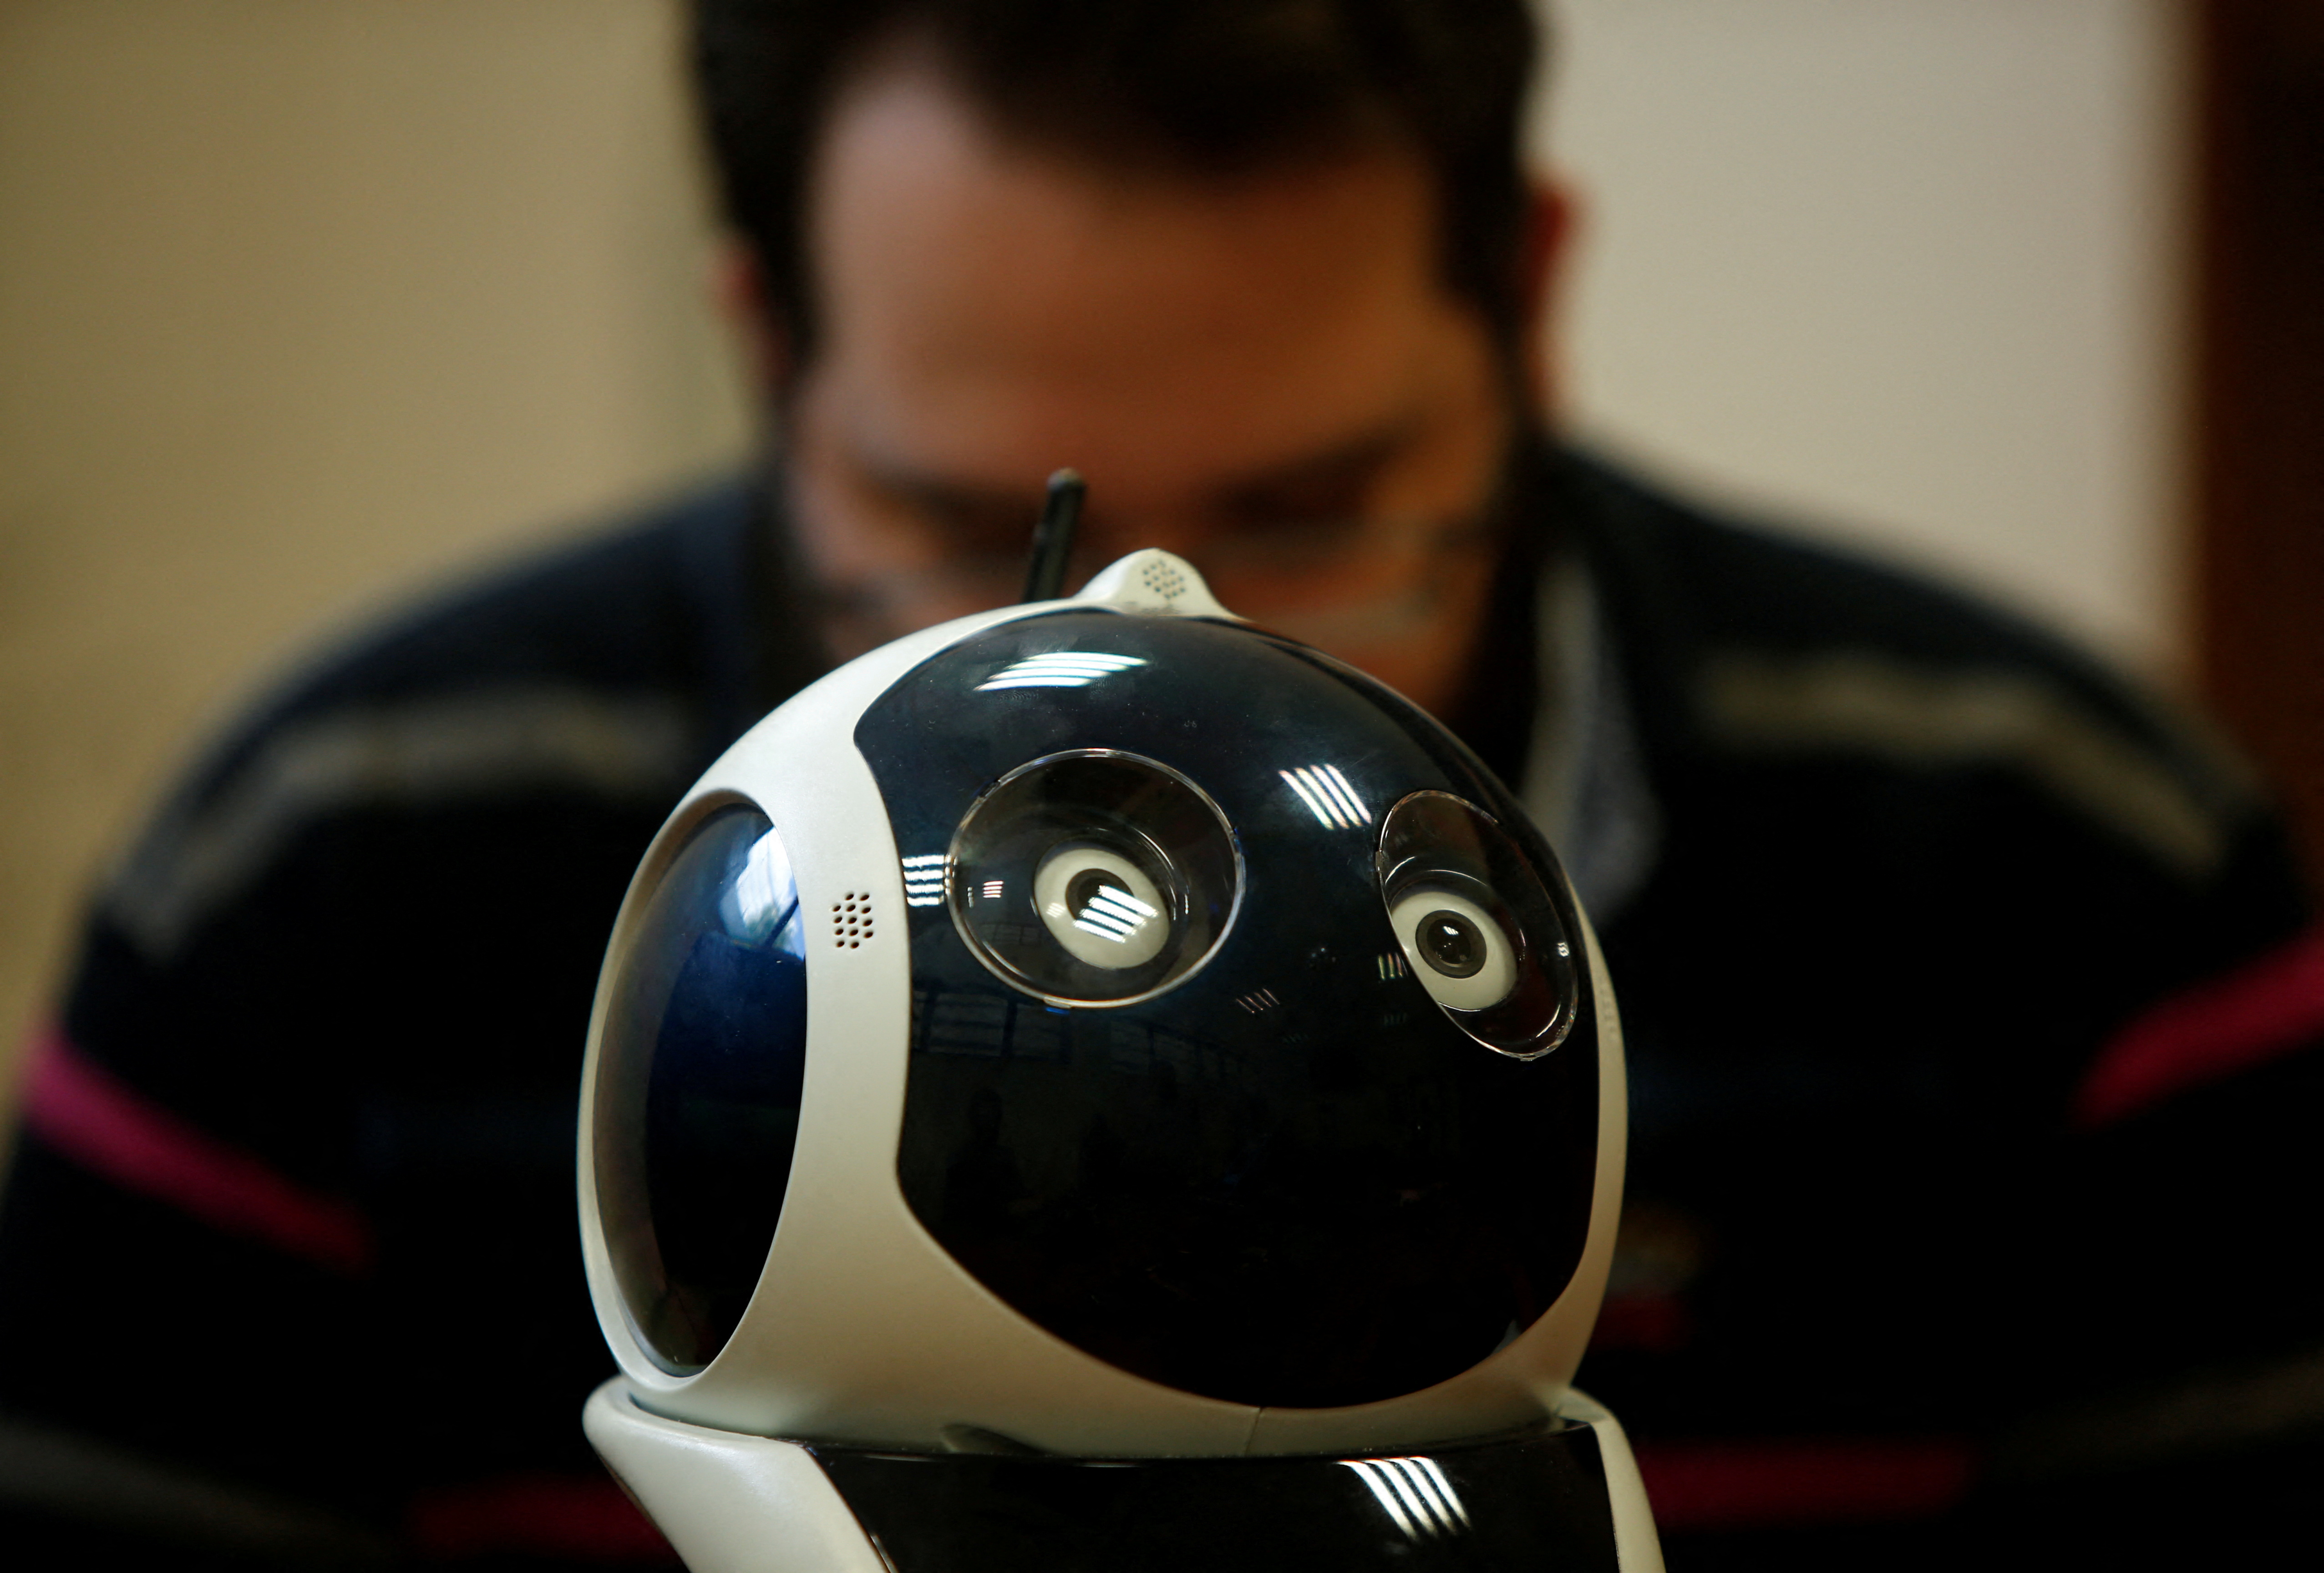 A research support officer and PhD student works on his artificial intelligence project to train robots to autonomously carry out various tasks, at the Department of Artificial Intelligence at the University of Malta in Msida